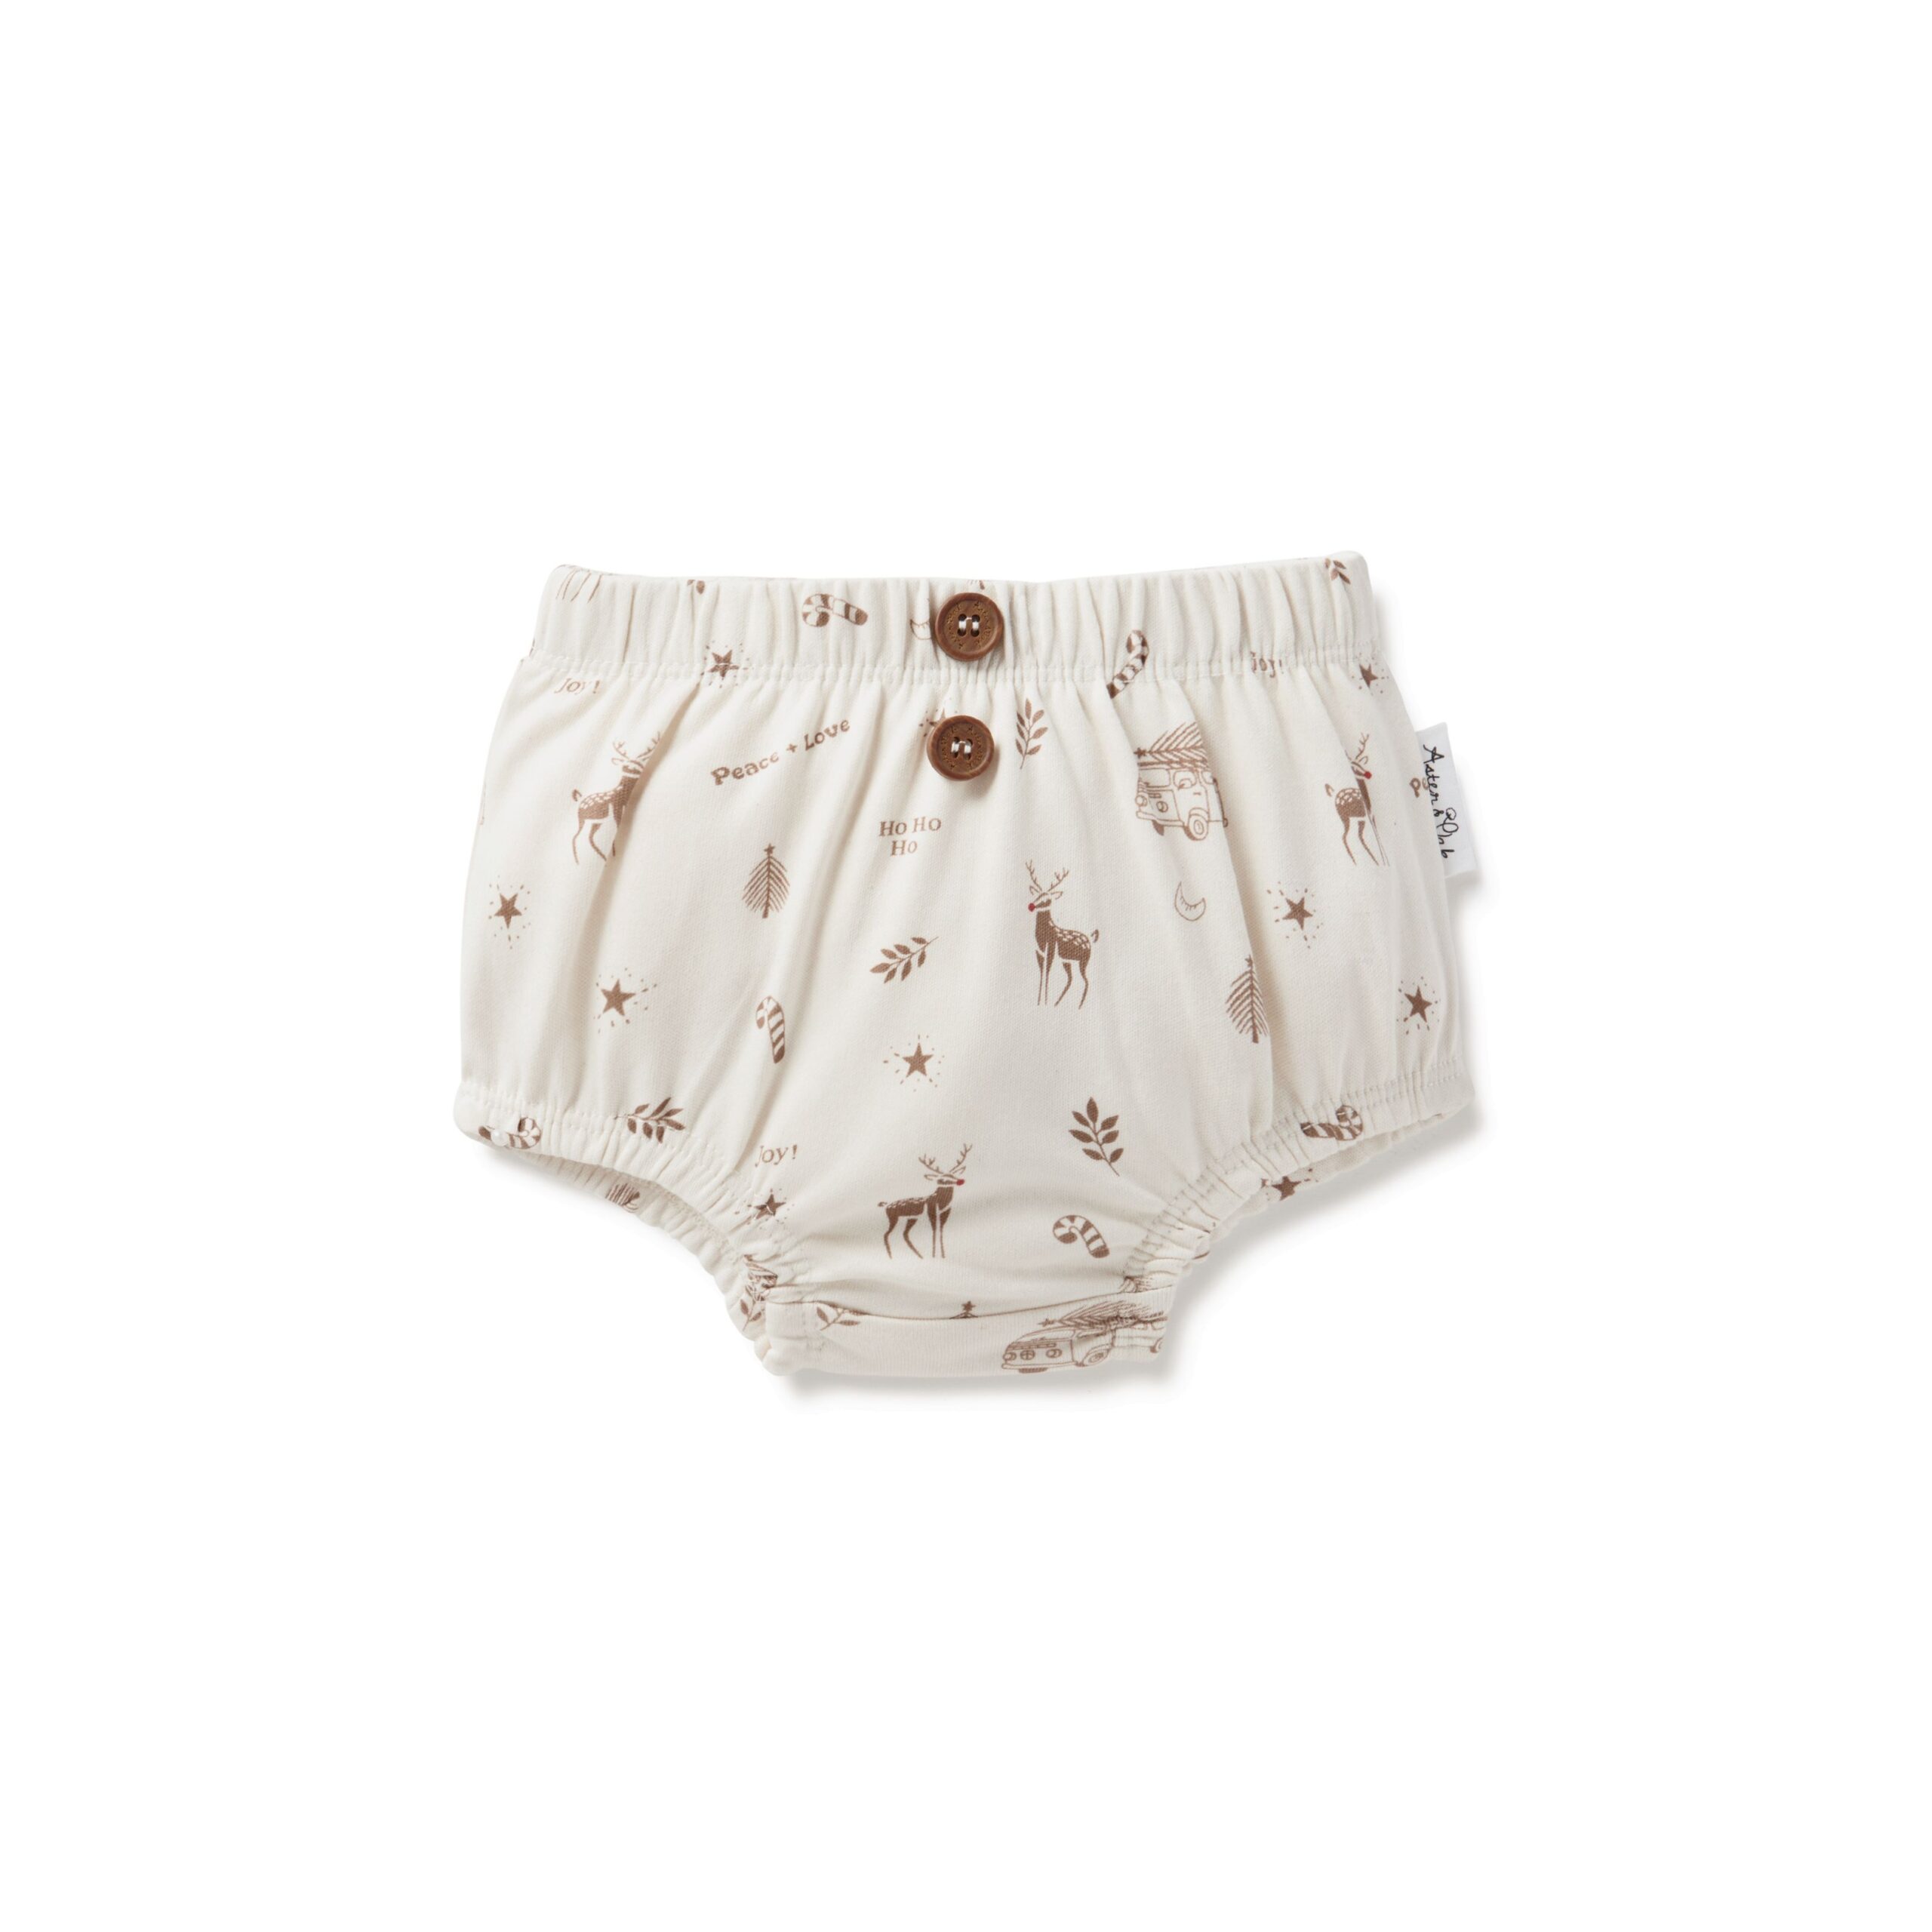 aster oak holidays bloomers scaled